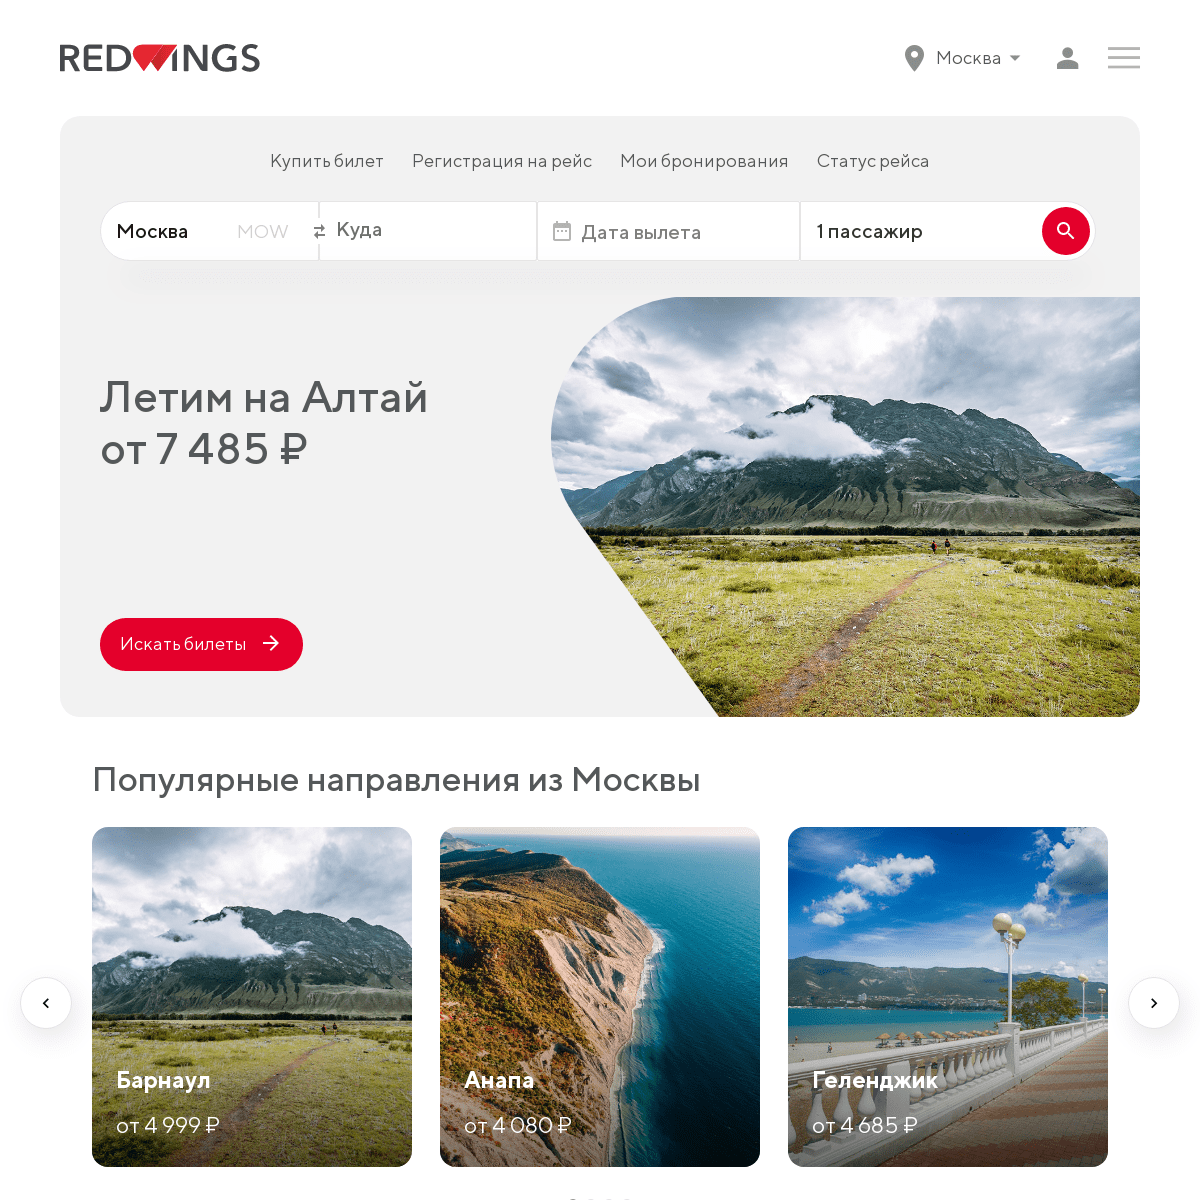 A complete backup of https://flyredwings.com